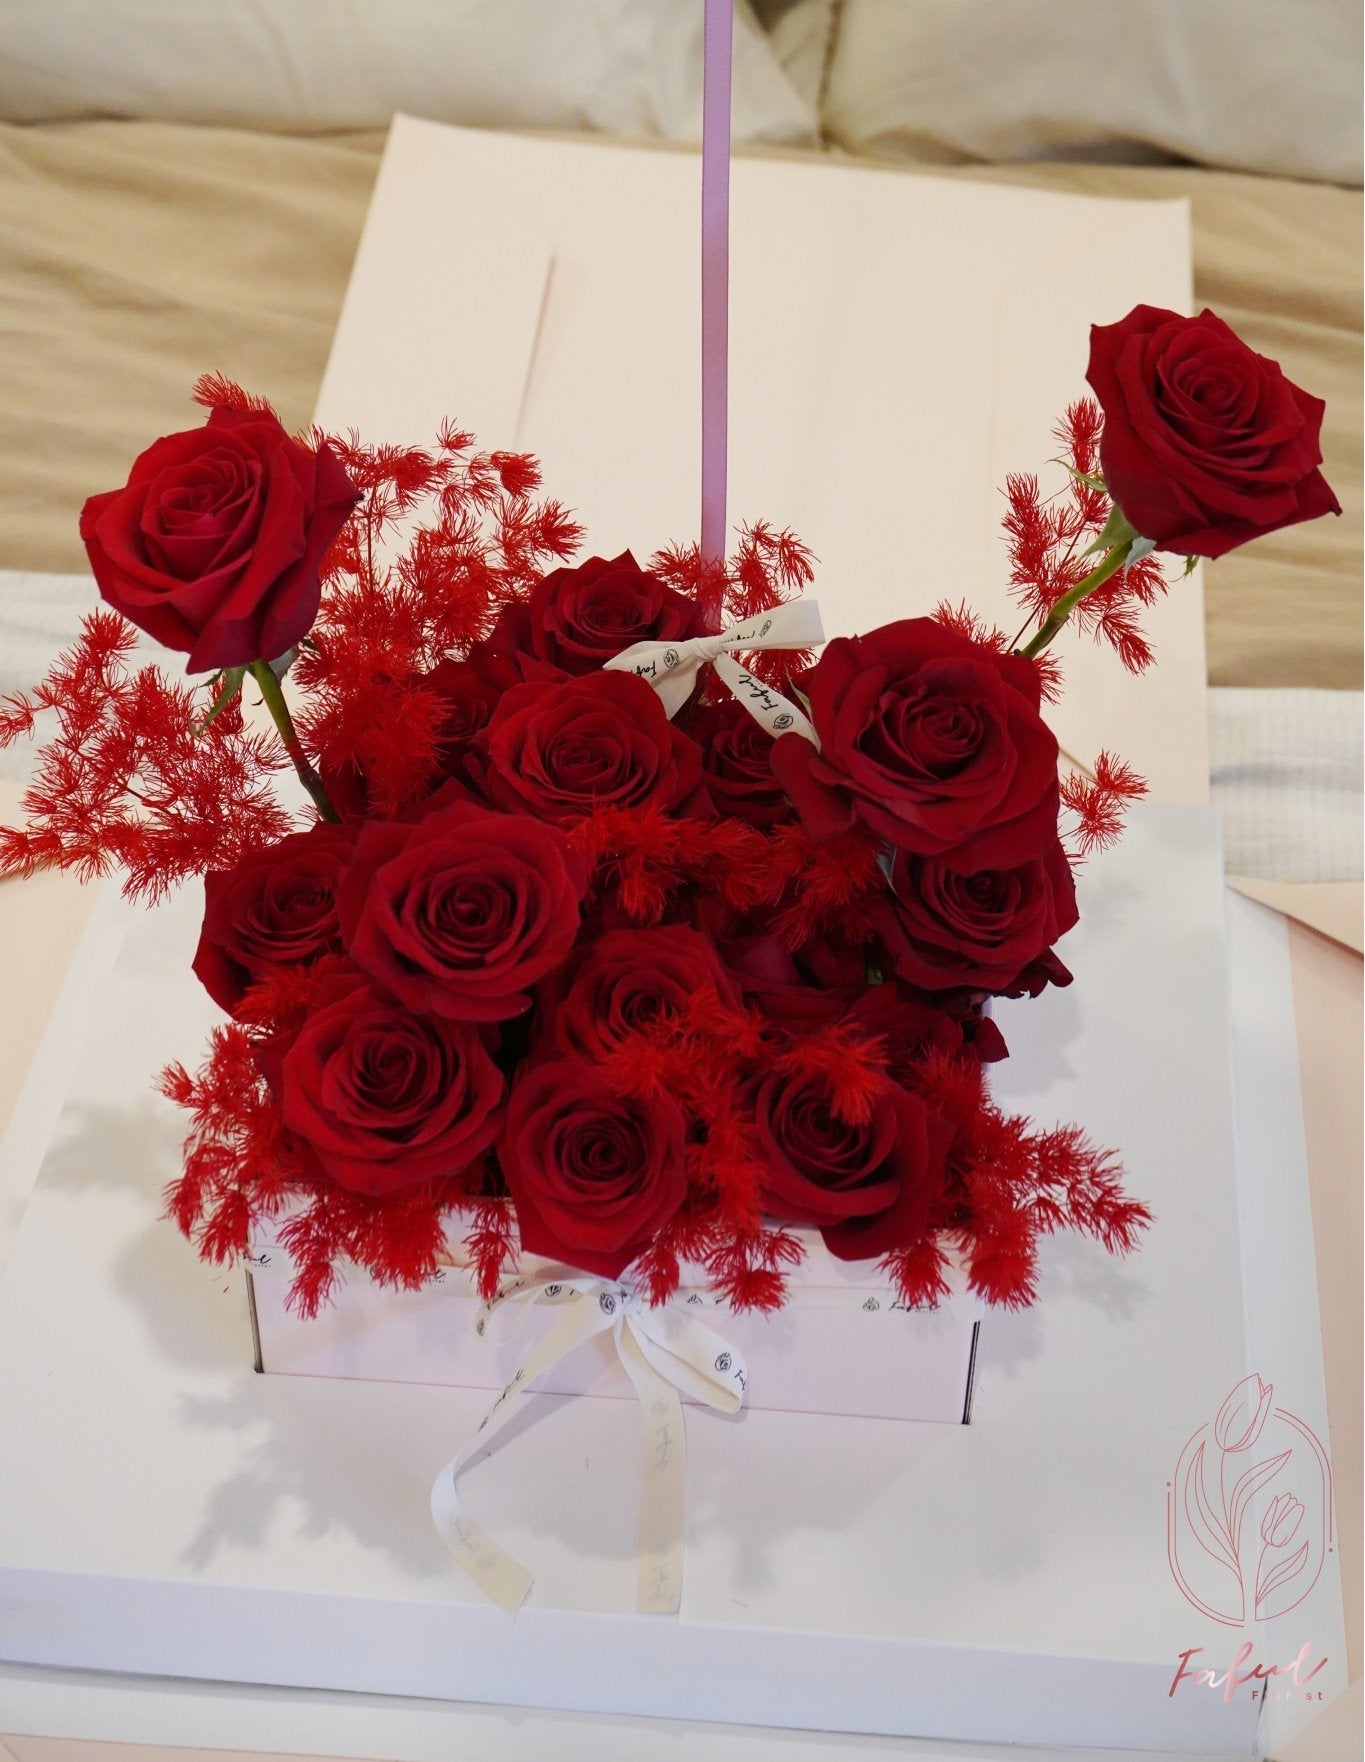 Red Romance | Red Rose - Fresh flowers, Roses- Red Romance  - Feather - Anniversary - Romance - Rose - 2